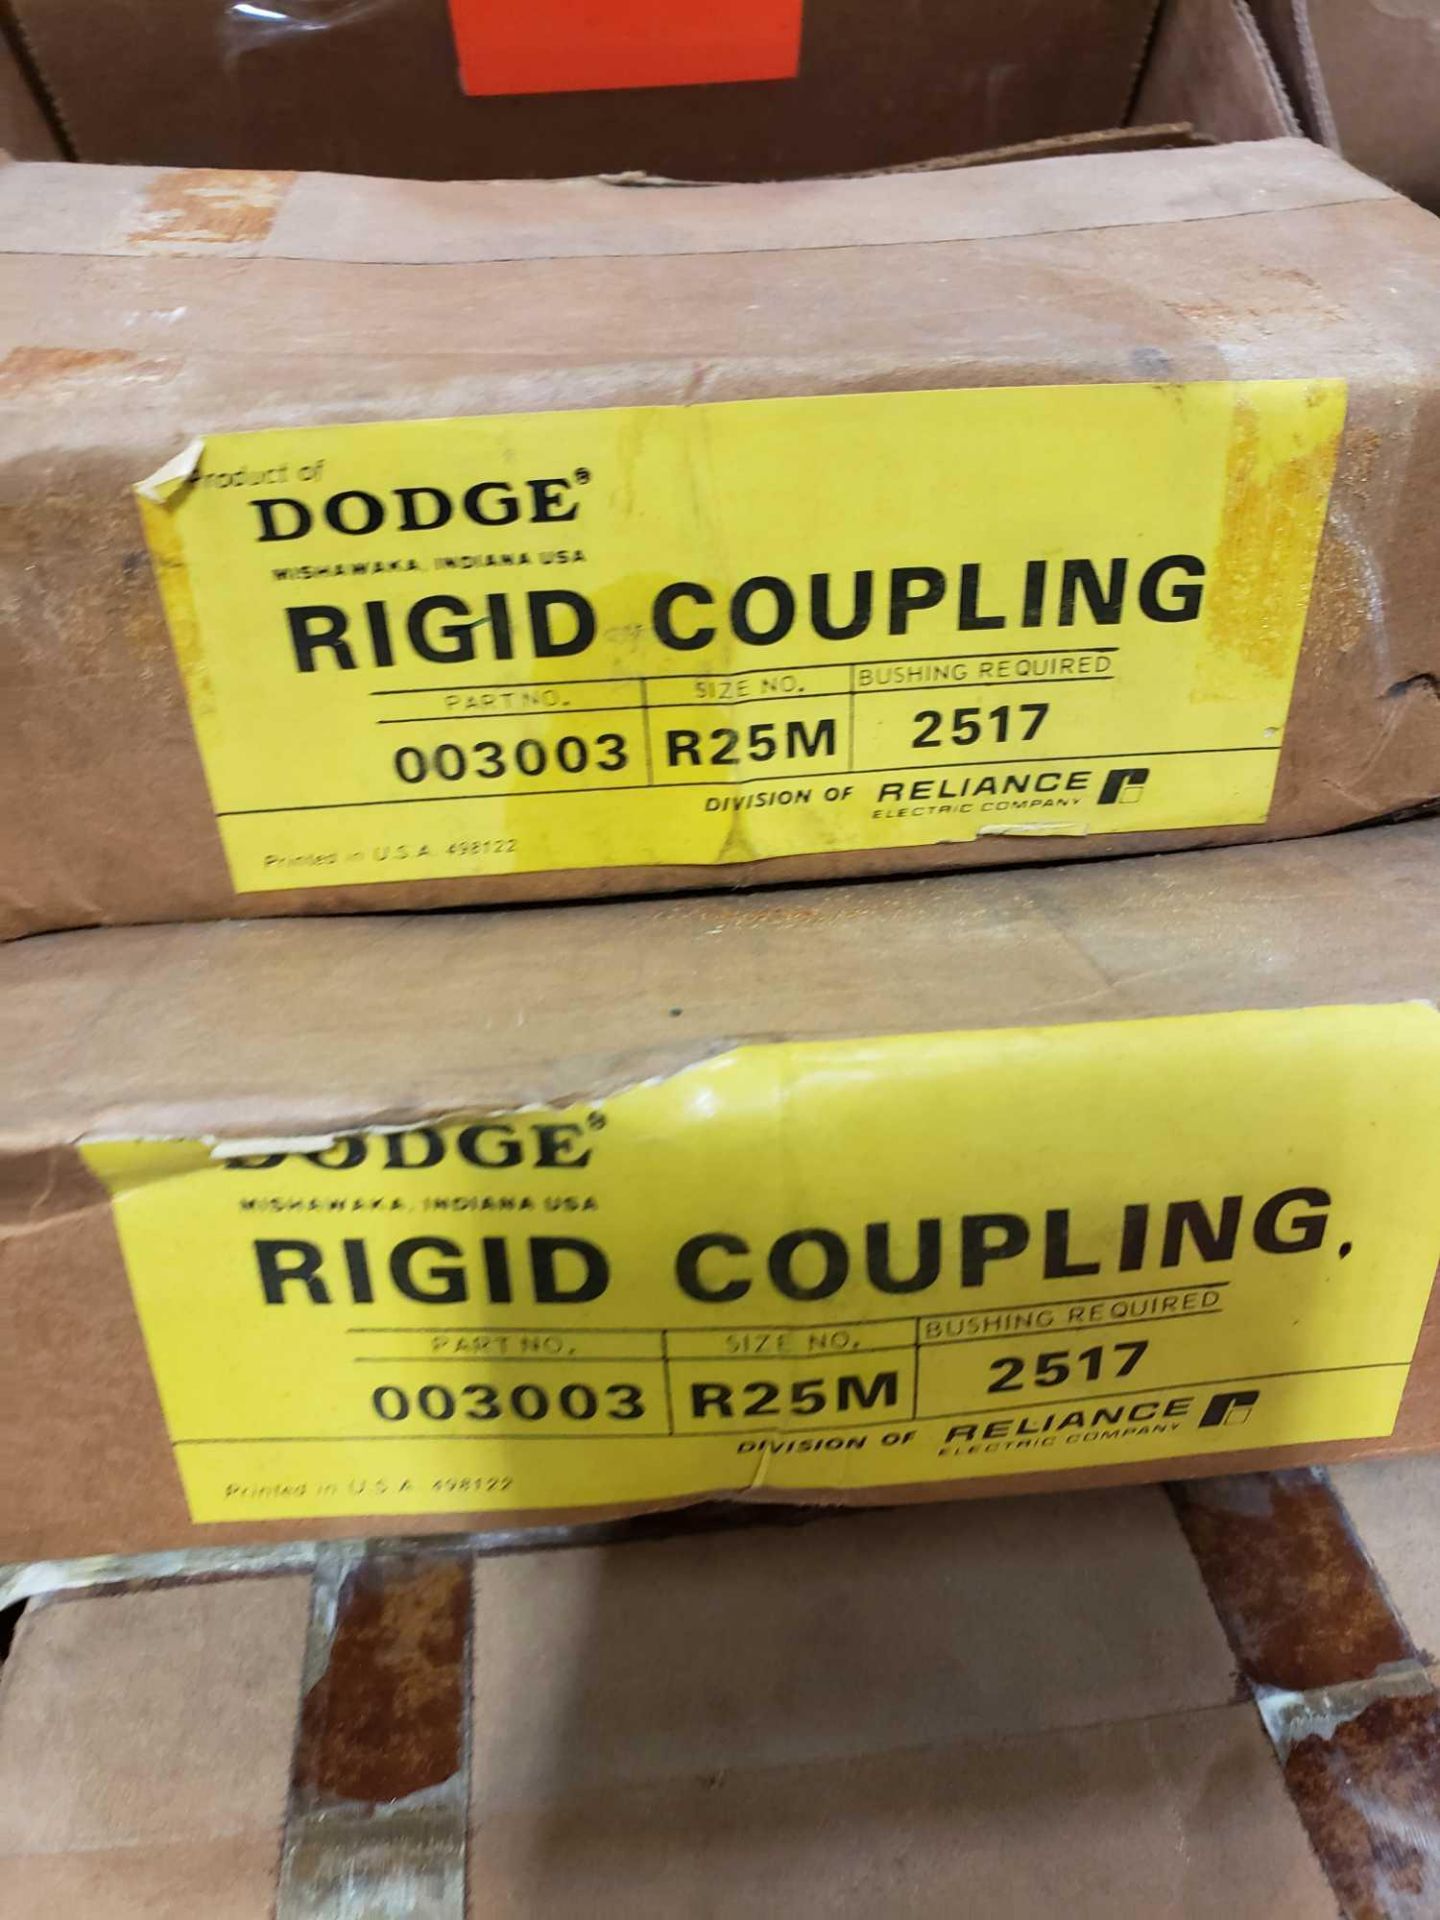 Qty 3 - Dodge rigid coupling model R25M. New in box. - Image 2 of 2